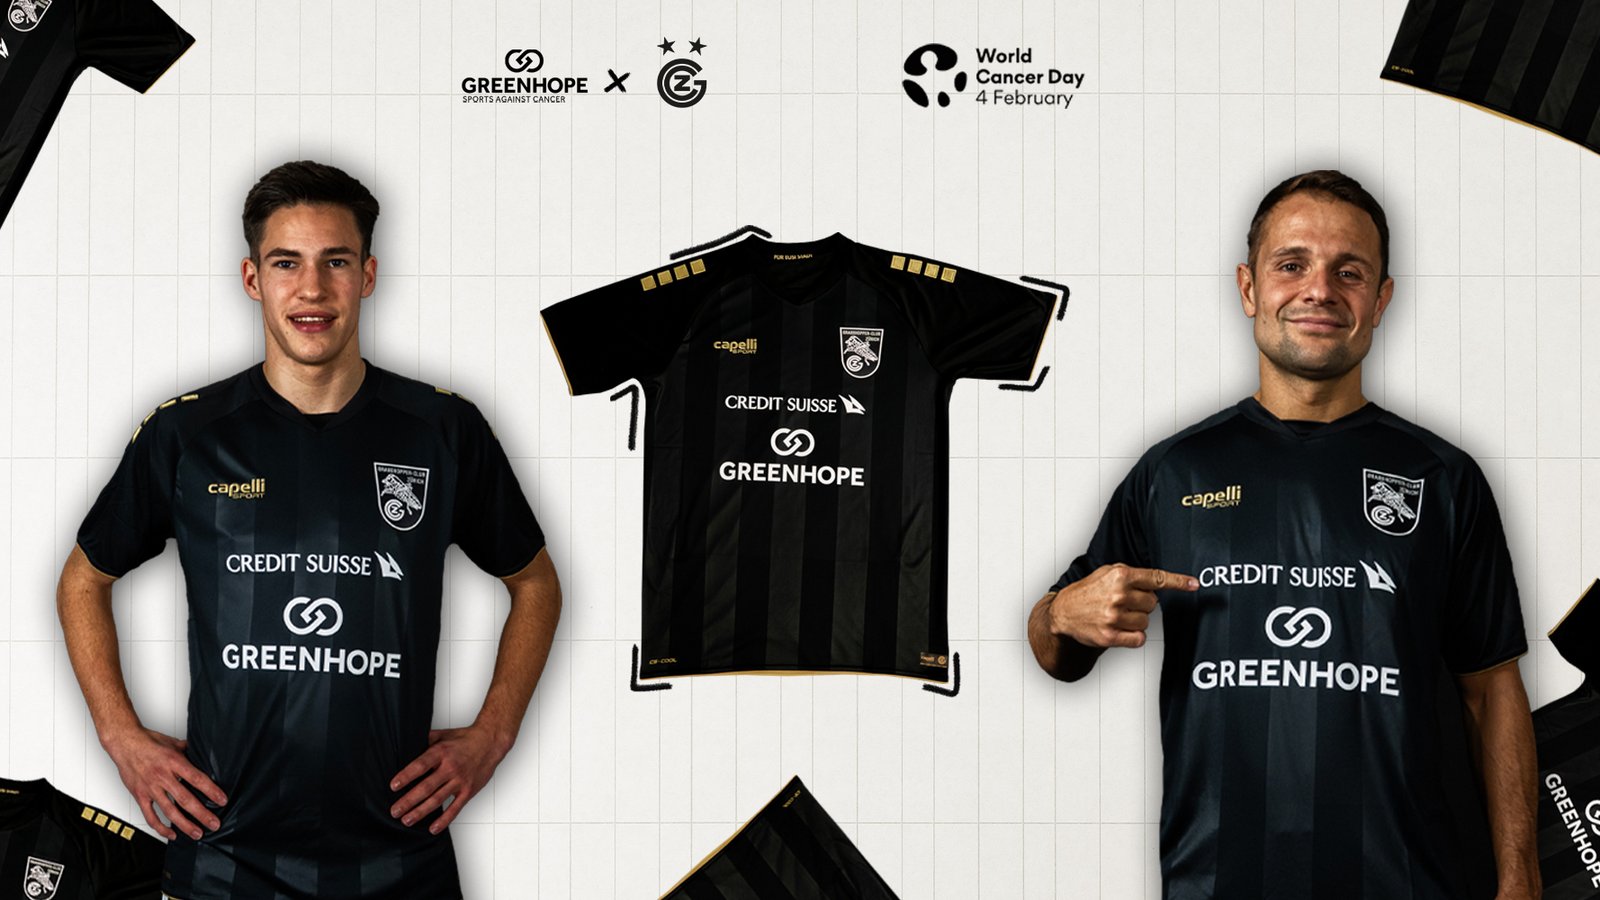 EXCLUSIVE DERBY SHIRT FOR WORLD CANCER DAY